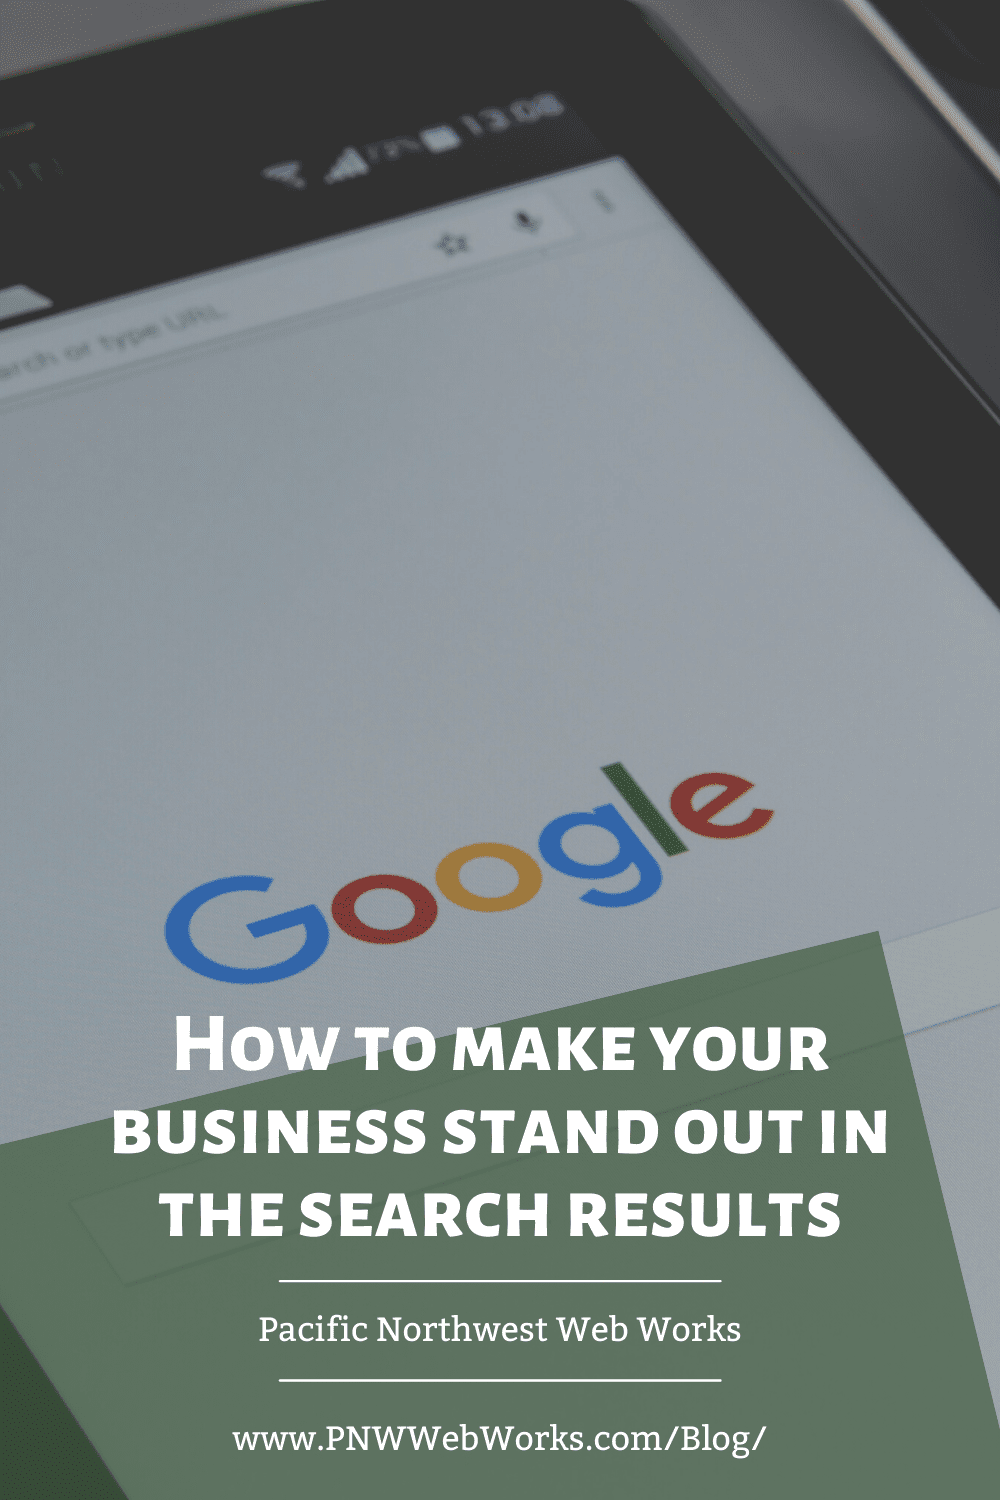 How to make your business stand out in the search results